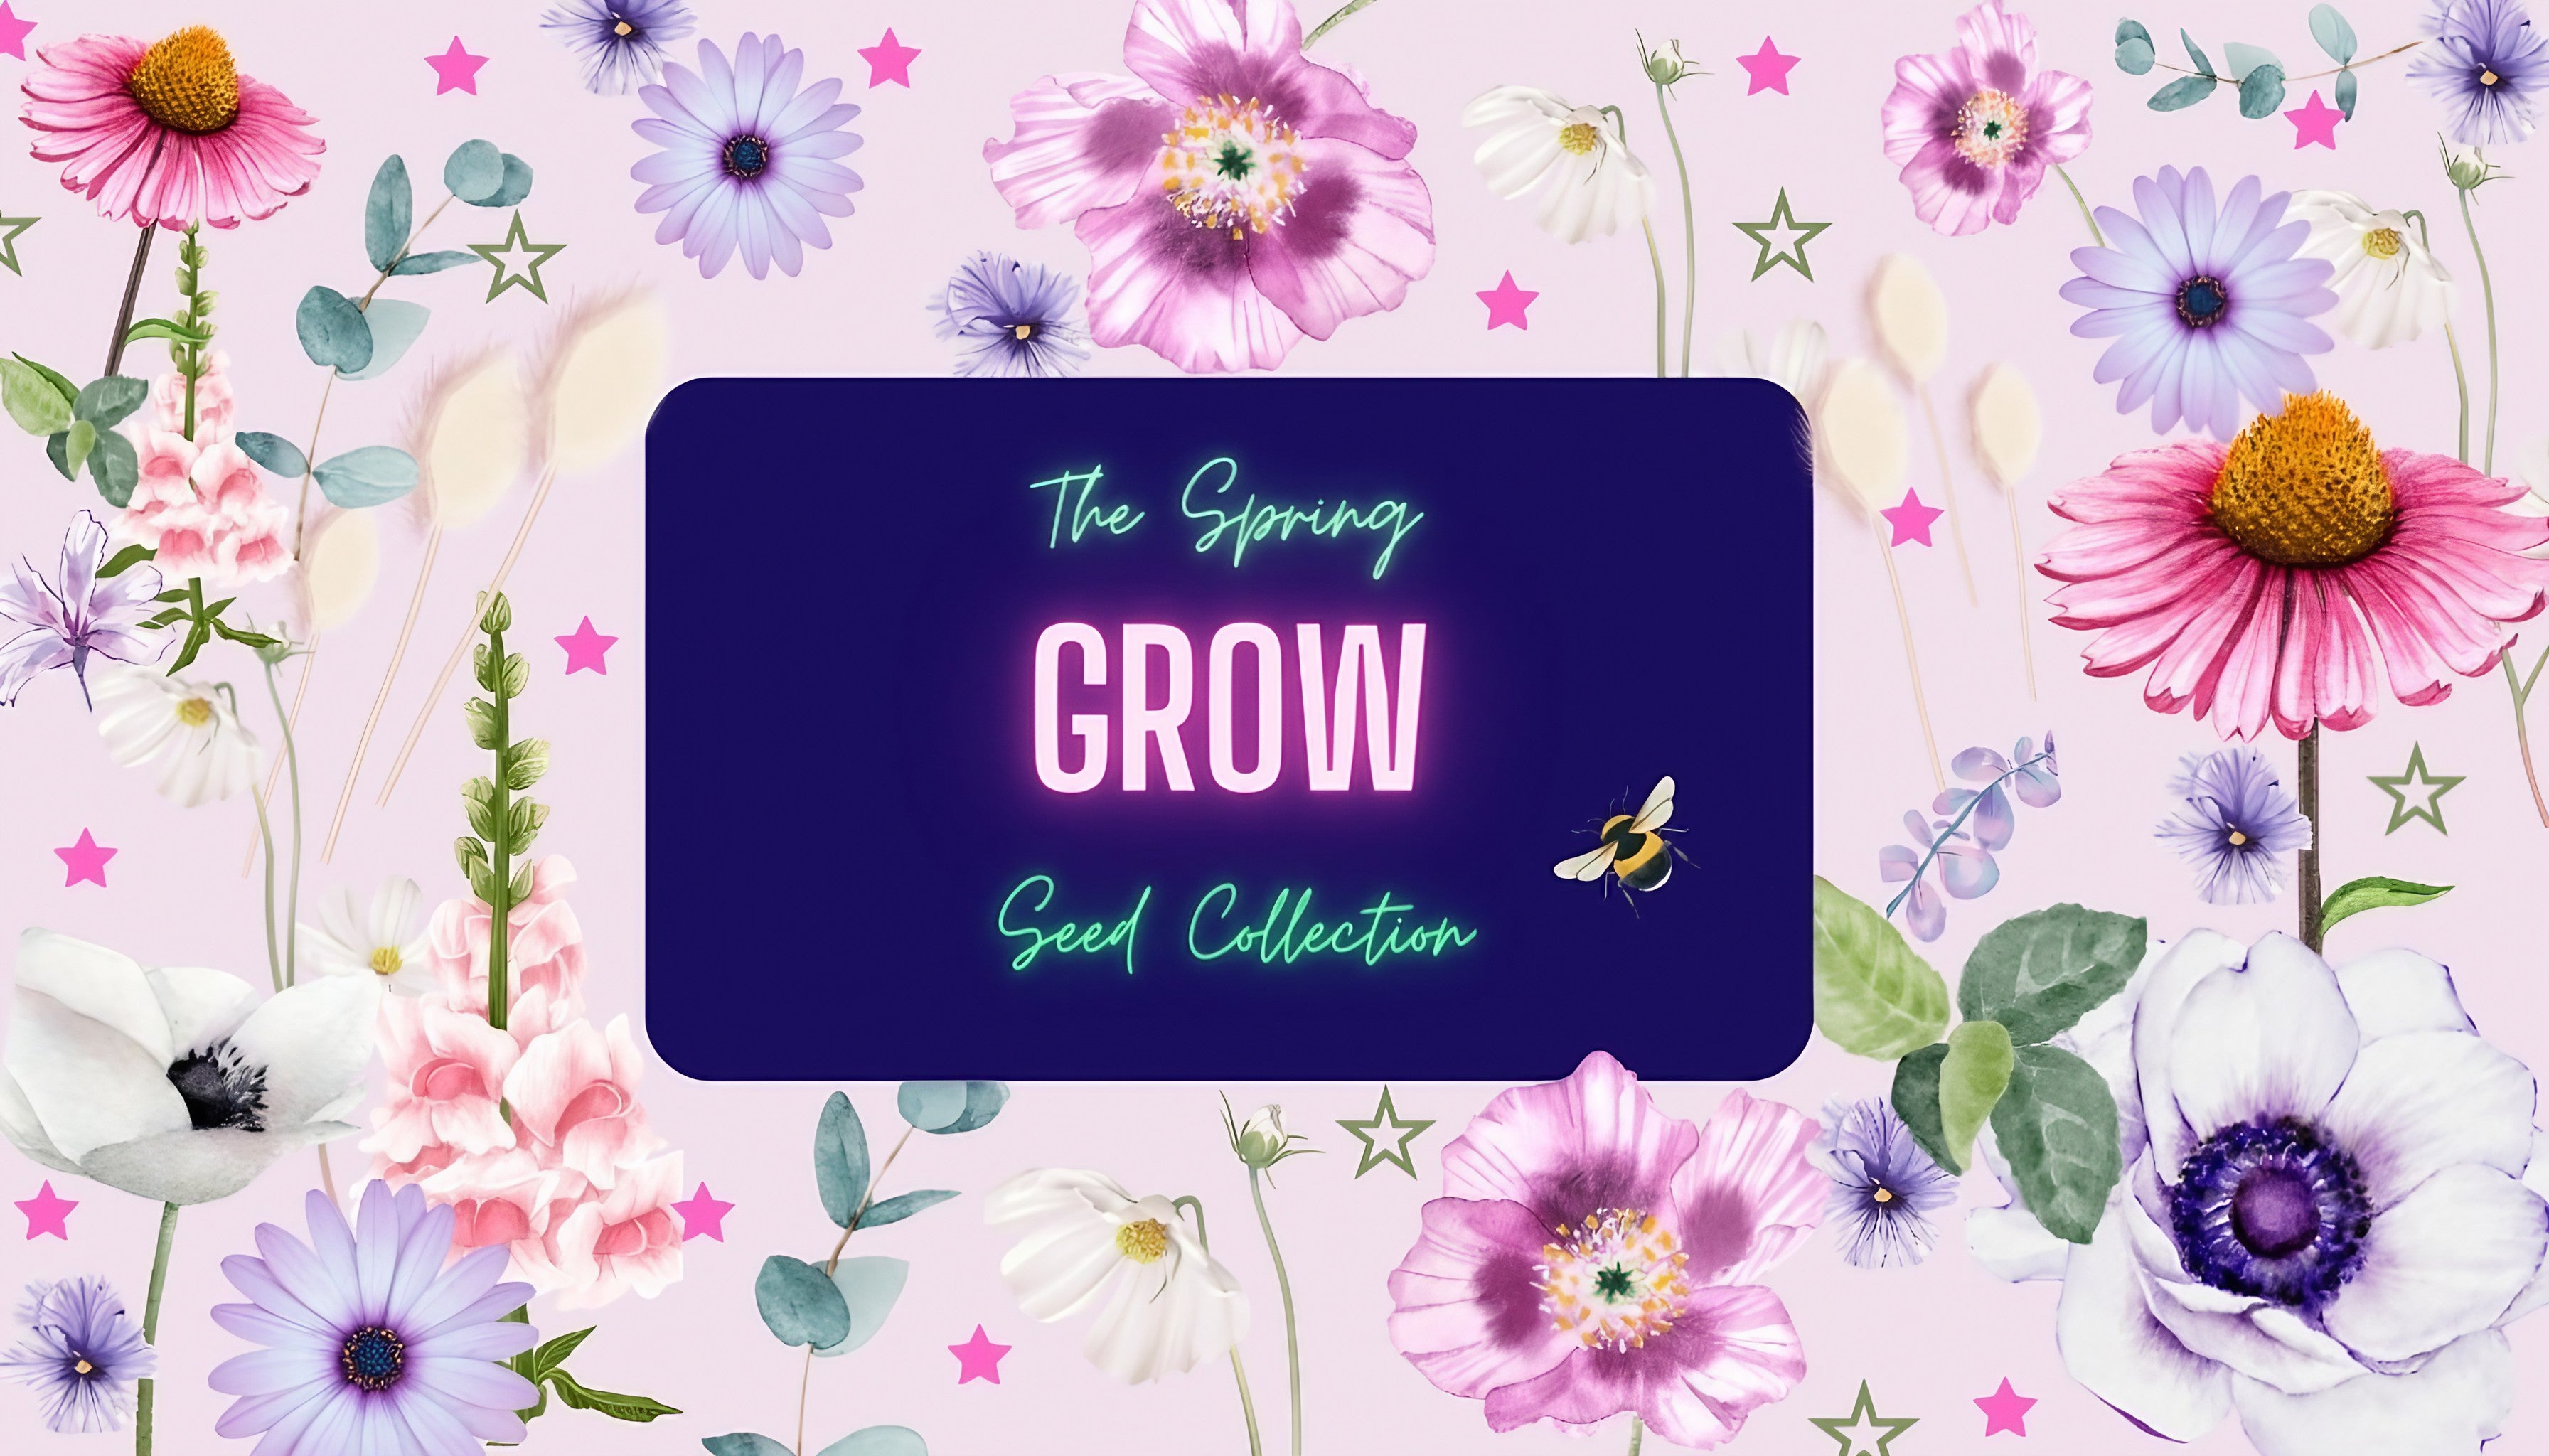 The Spring Seed Collection